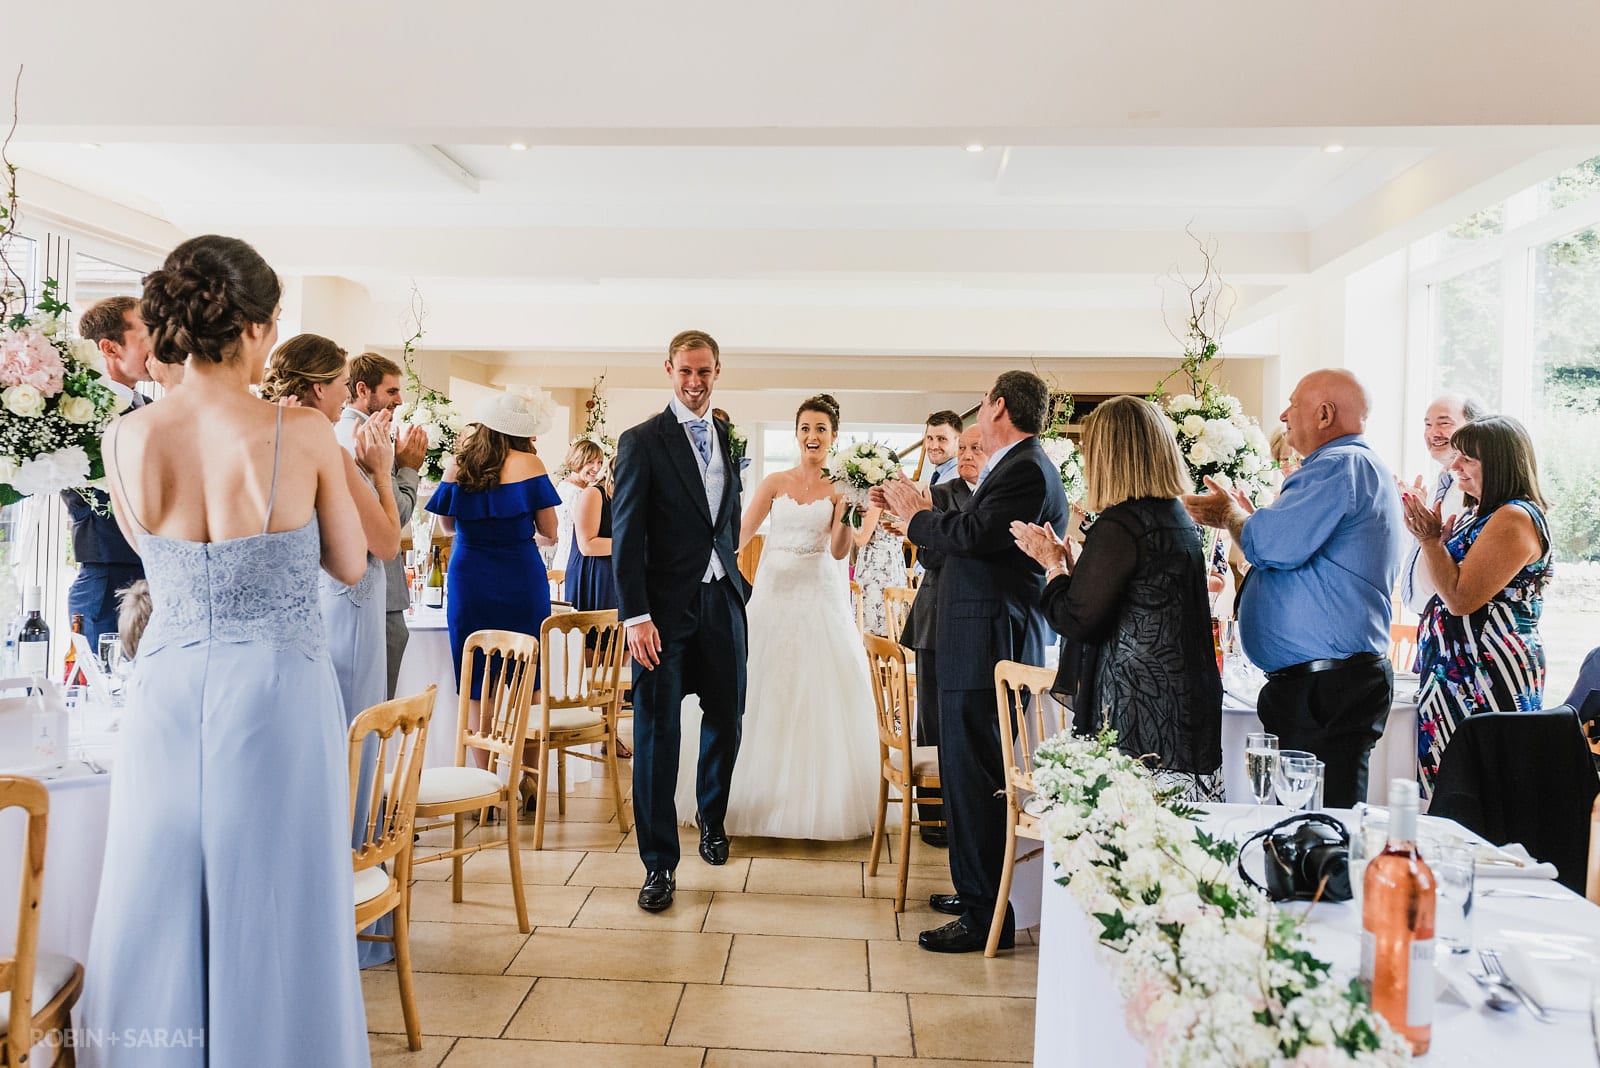 Bride and groom enter Coachhouse at Delbury Hall for meal as guests clap